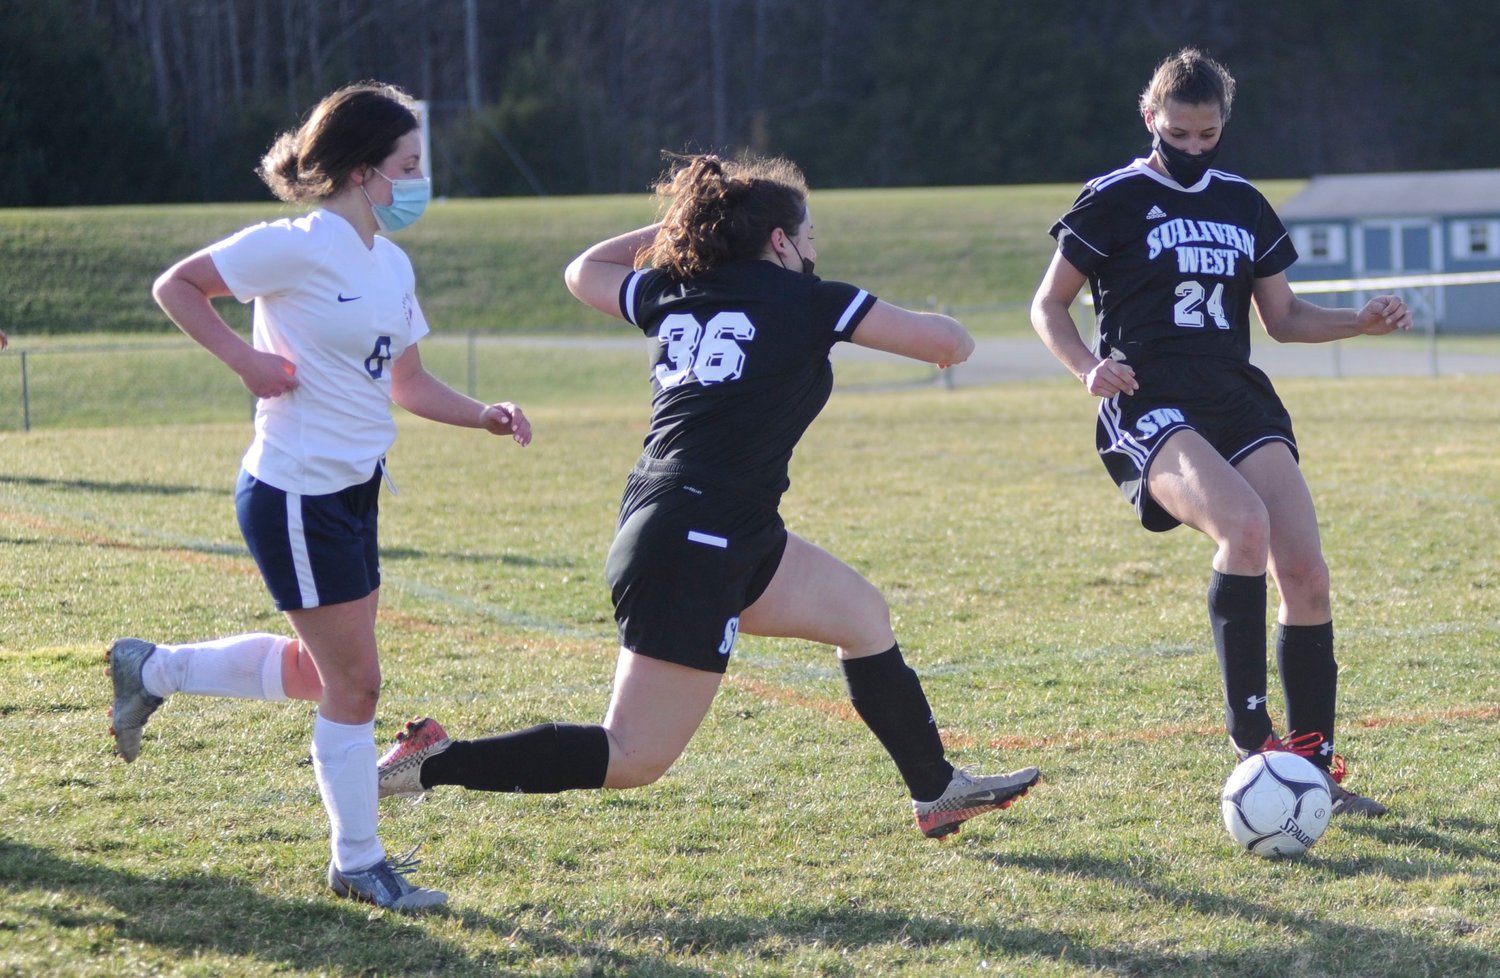 Sequential shot. Sullivan West’s Mia Nunari fires a late-game shot on goal as her teammate Anna Bernas sets it up, while Tri-Valley’s Clare Verbert tries to cut her off.